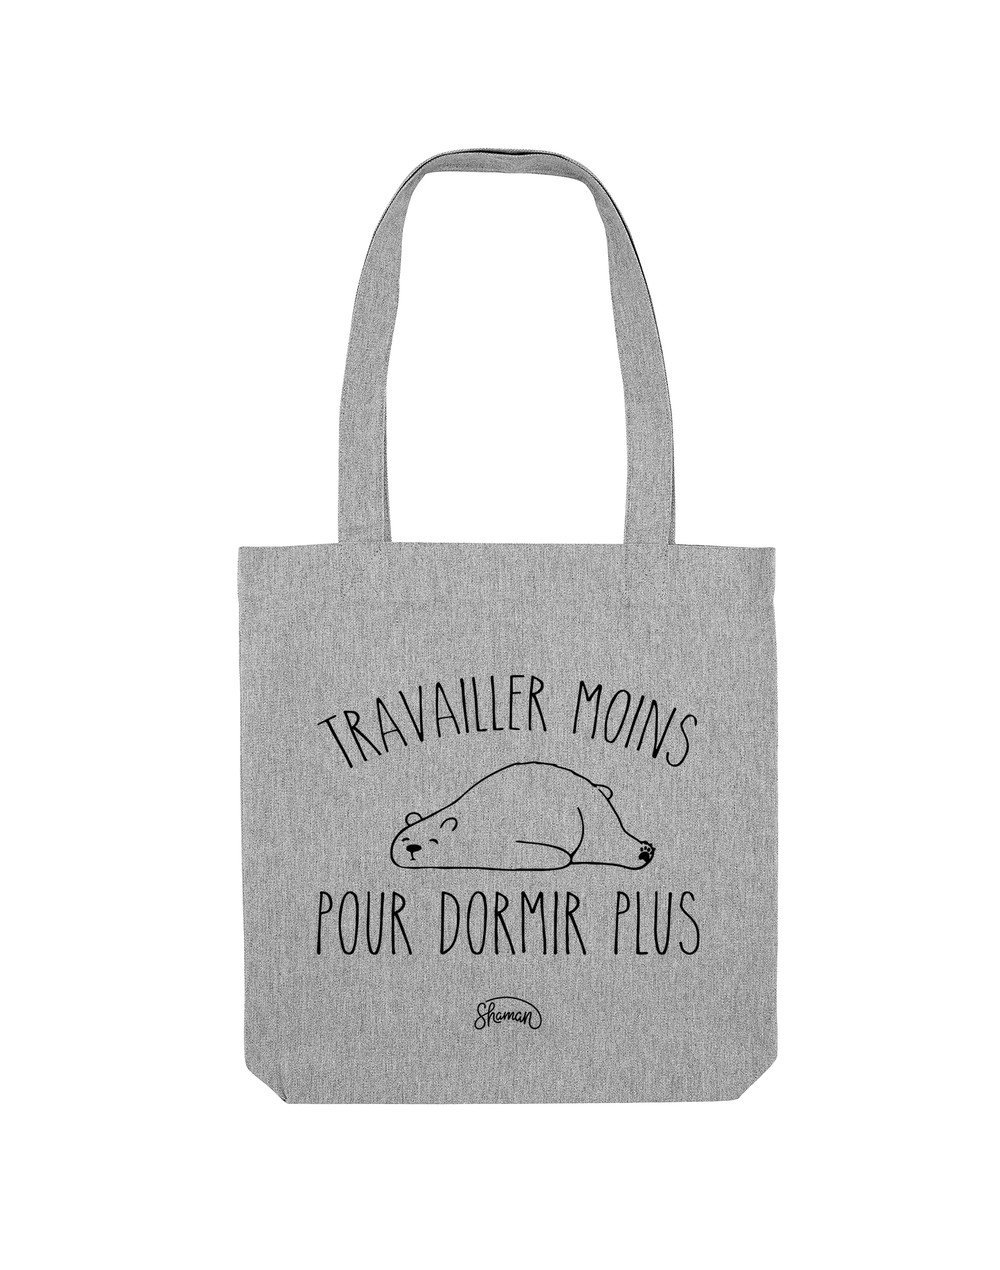 Tote Bag "Travailler moins"